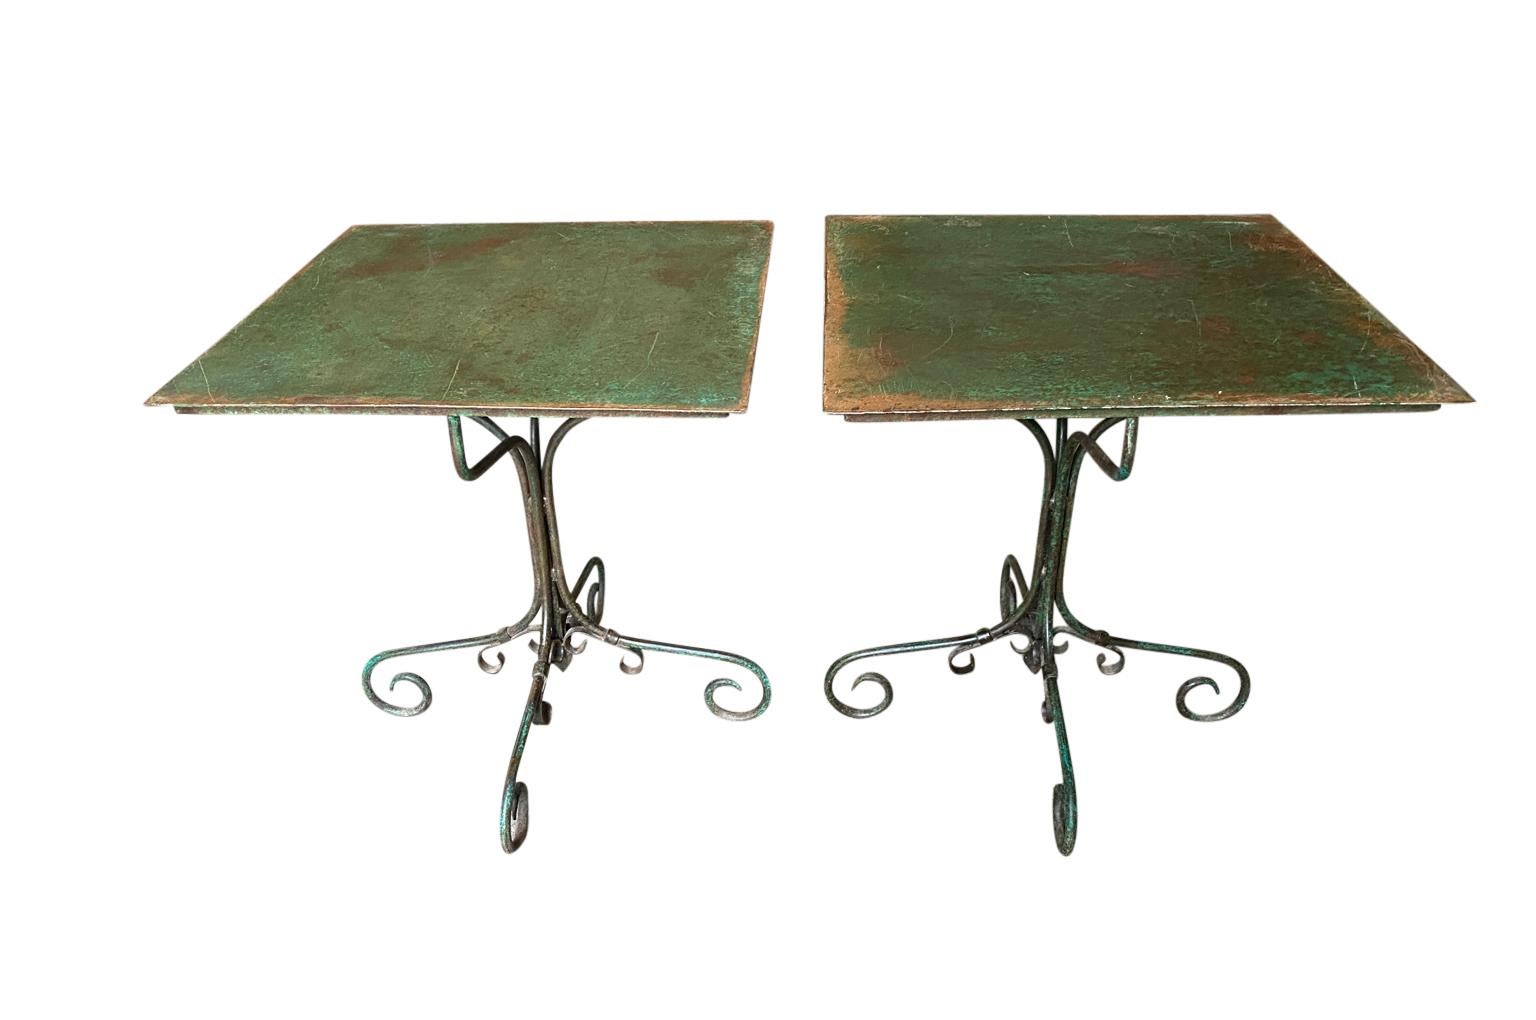 A delightful pair of 19th century Garden tables from the Provence area of France. Soundly constructed from painted iron. These tables will add charm to any casual interior of garden.